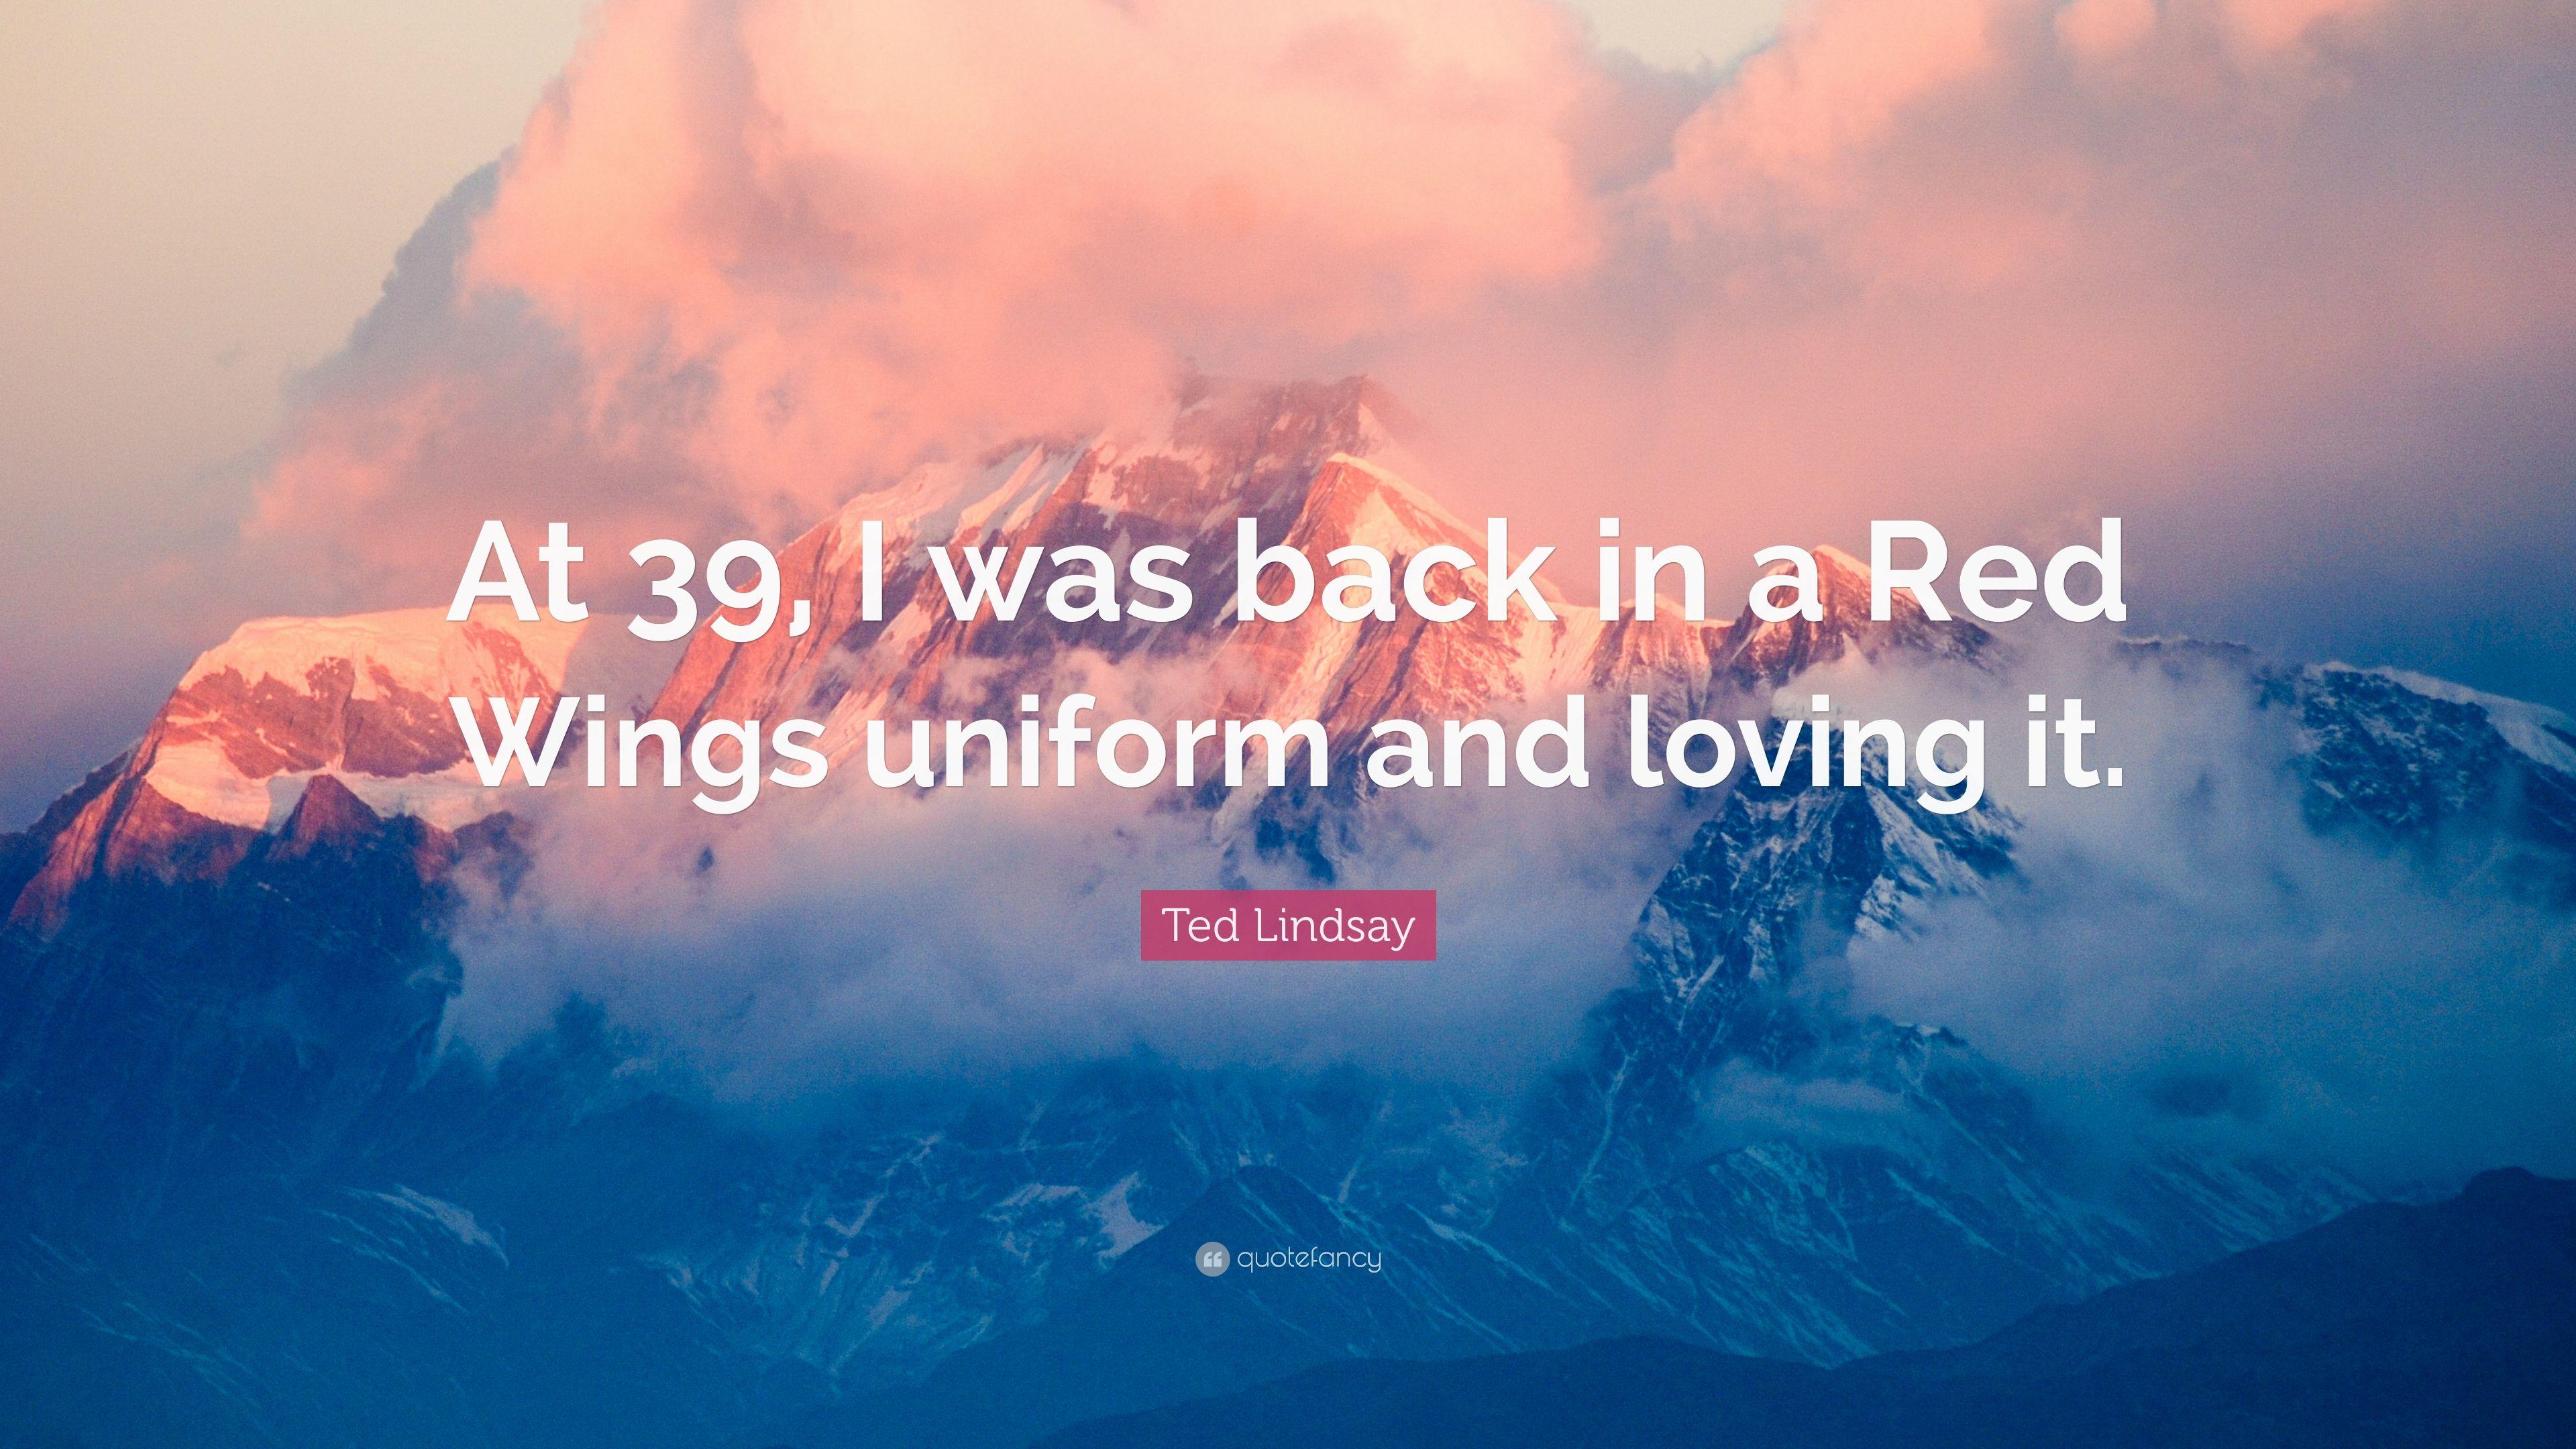 Ted Lindsay Quote: “At I was back in a Red Wings uniform